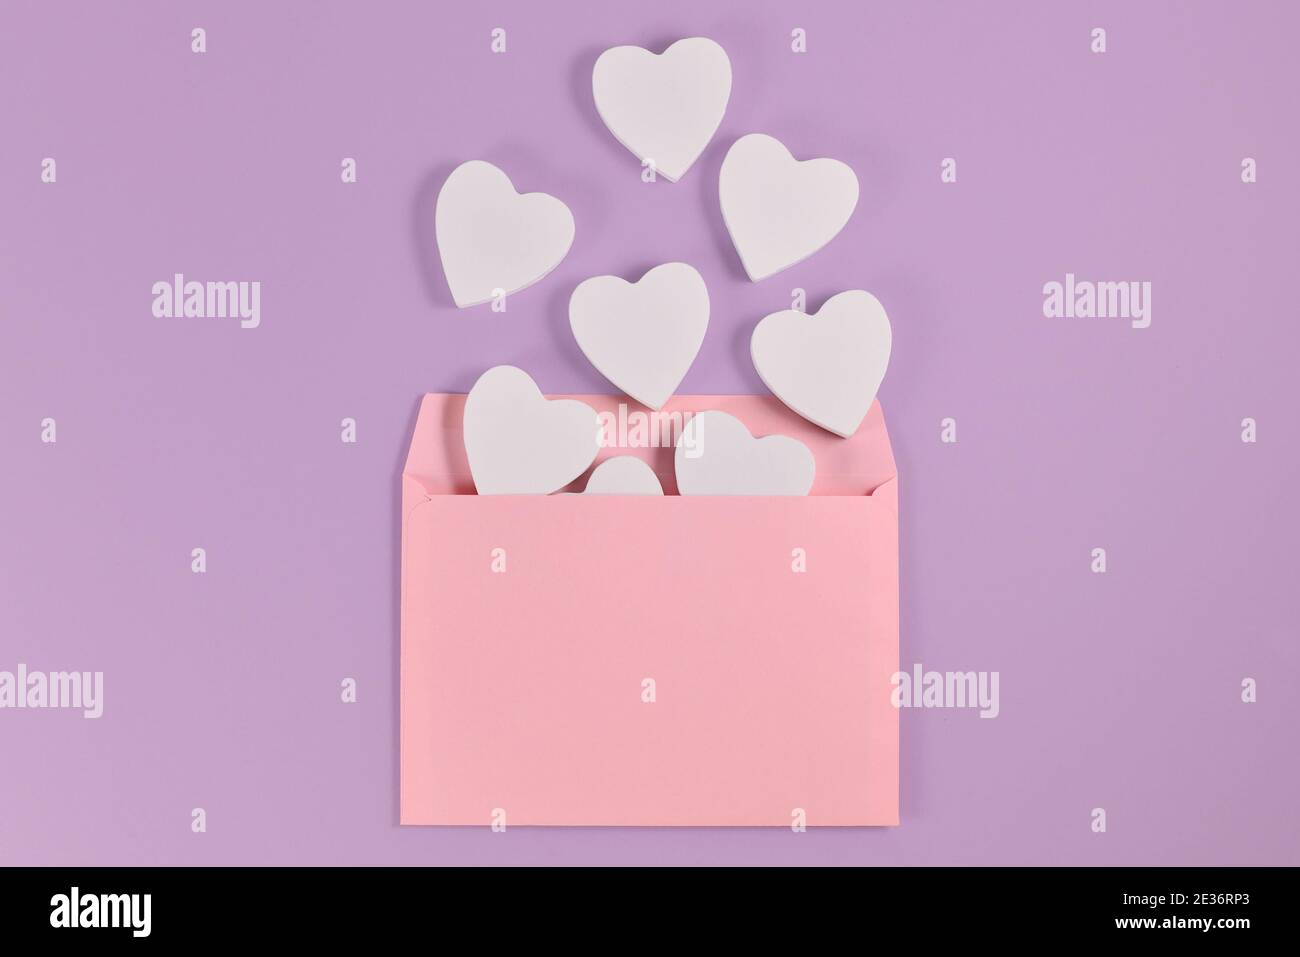 Love letter with pink envelope with white hearts spilling out on pastel colored violet background Stock Photo